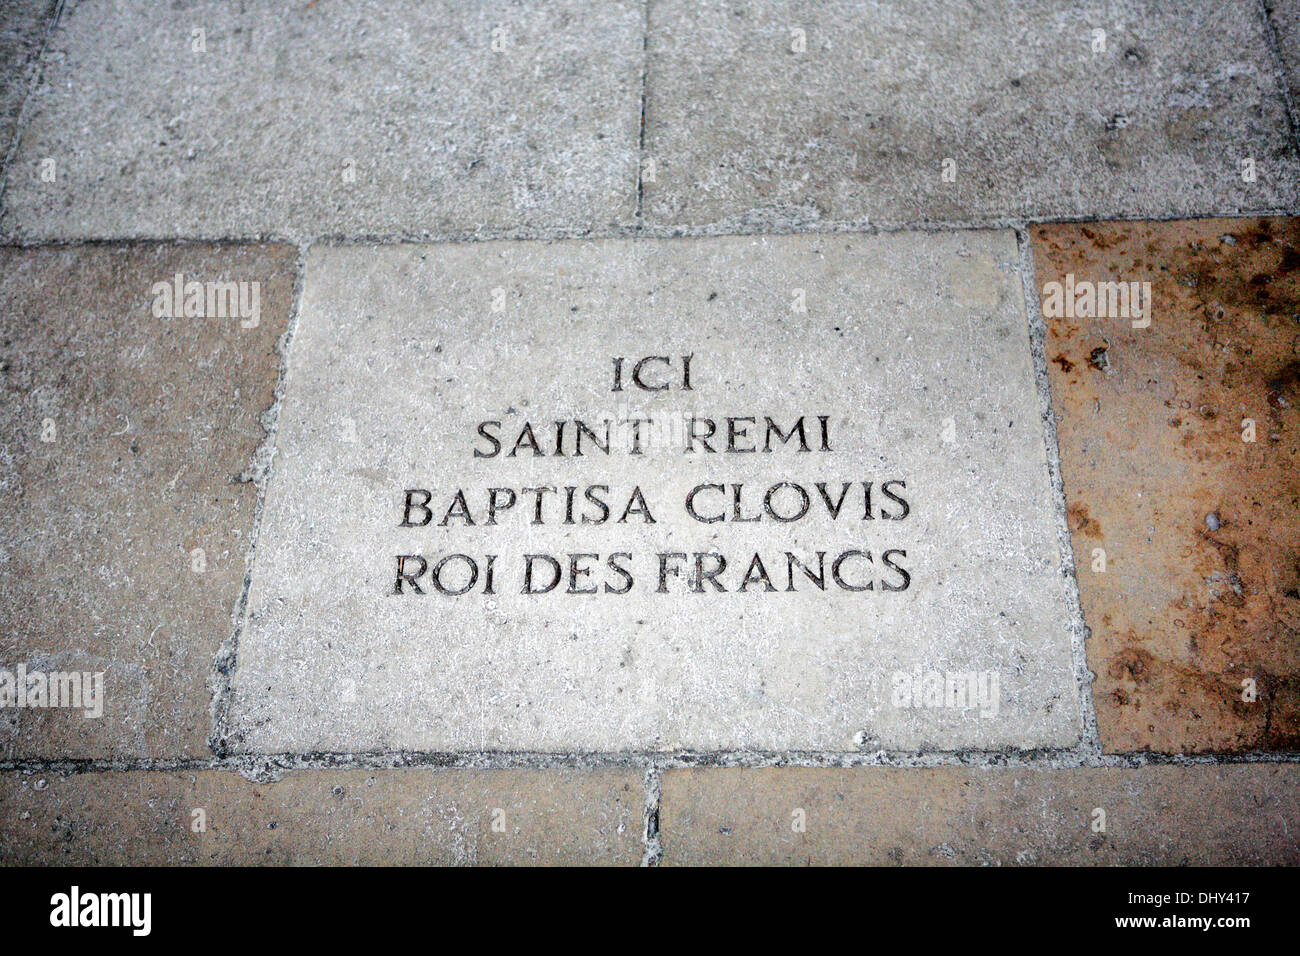 Paving stone in cathedral nave commemorating baptism of Clovis by Saint Remi, Reims cathedral, France Stock Photo